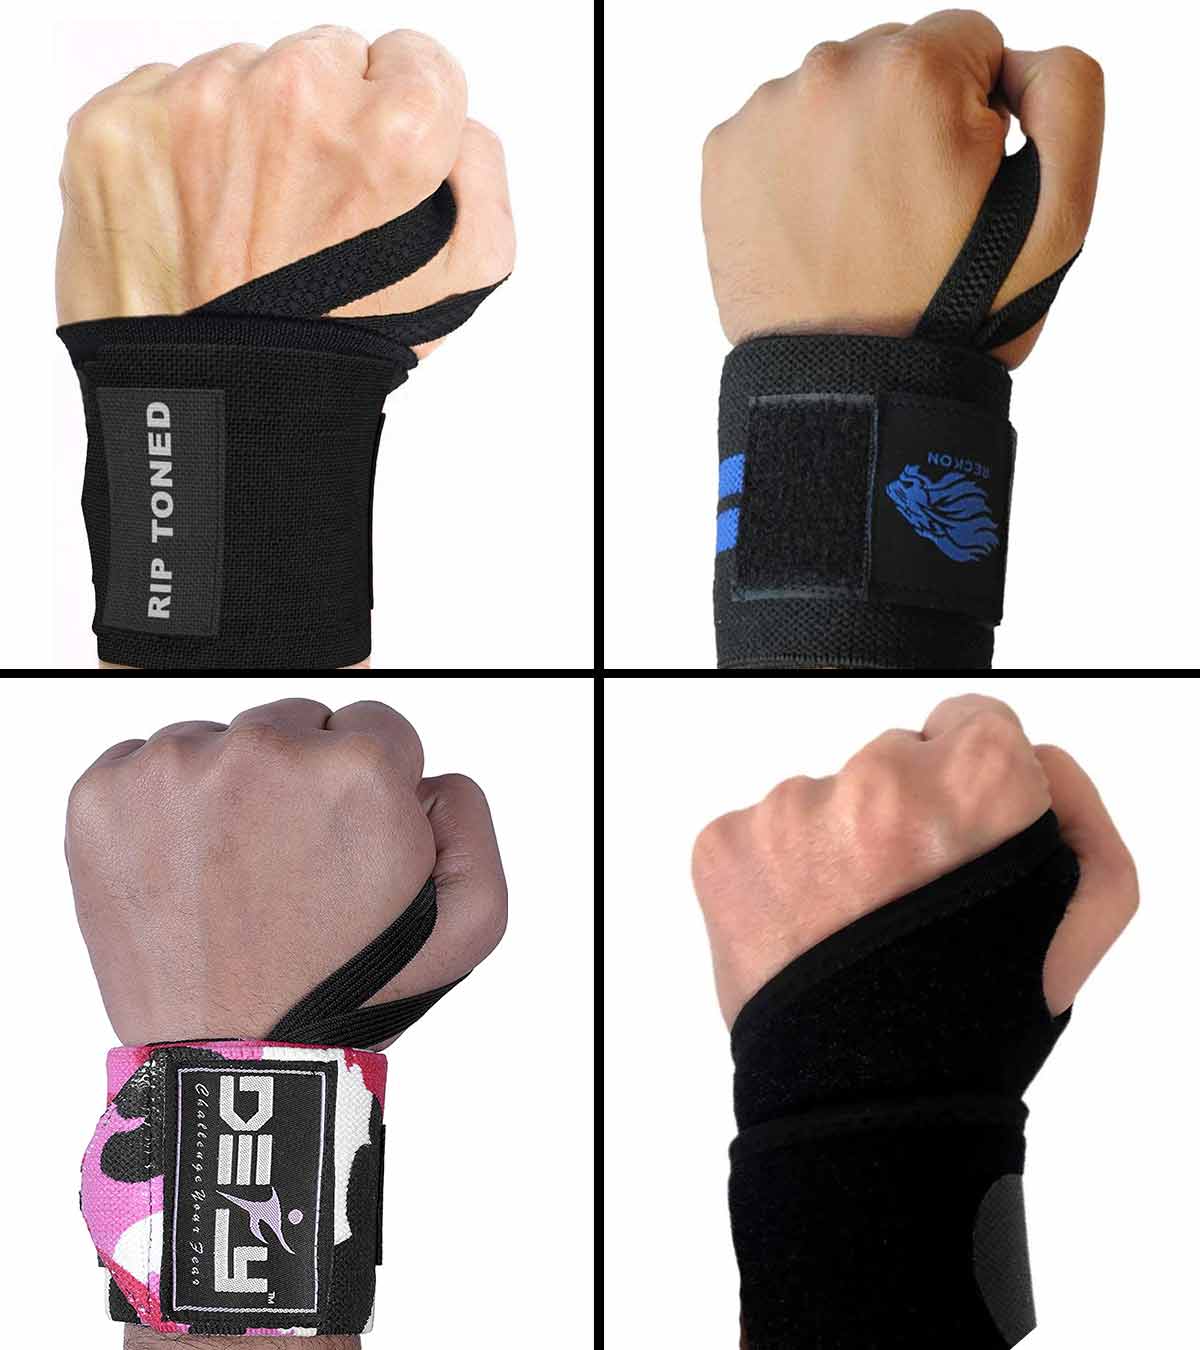 FITAXIS Weight Lifting Gym Training Wrist Wraps for Wrist Support Crossfit Straps 12”-18” Sold in Pair Best Support & Stiffness